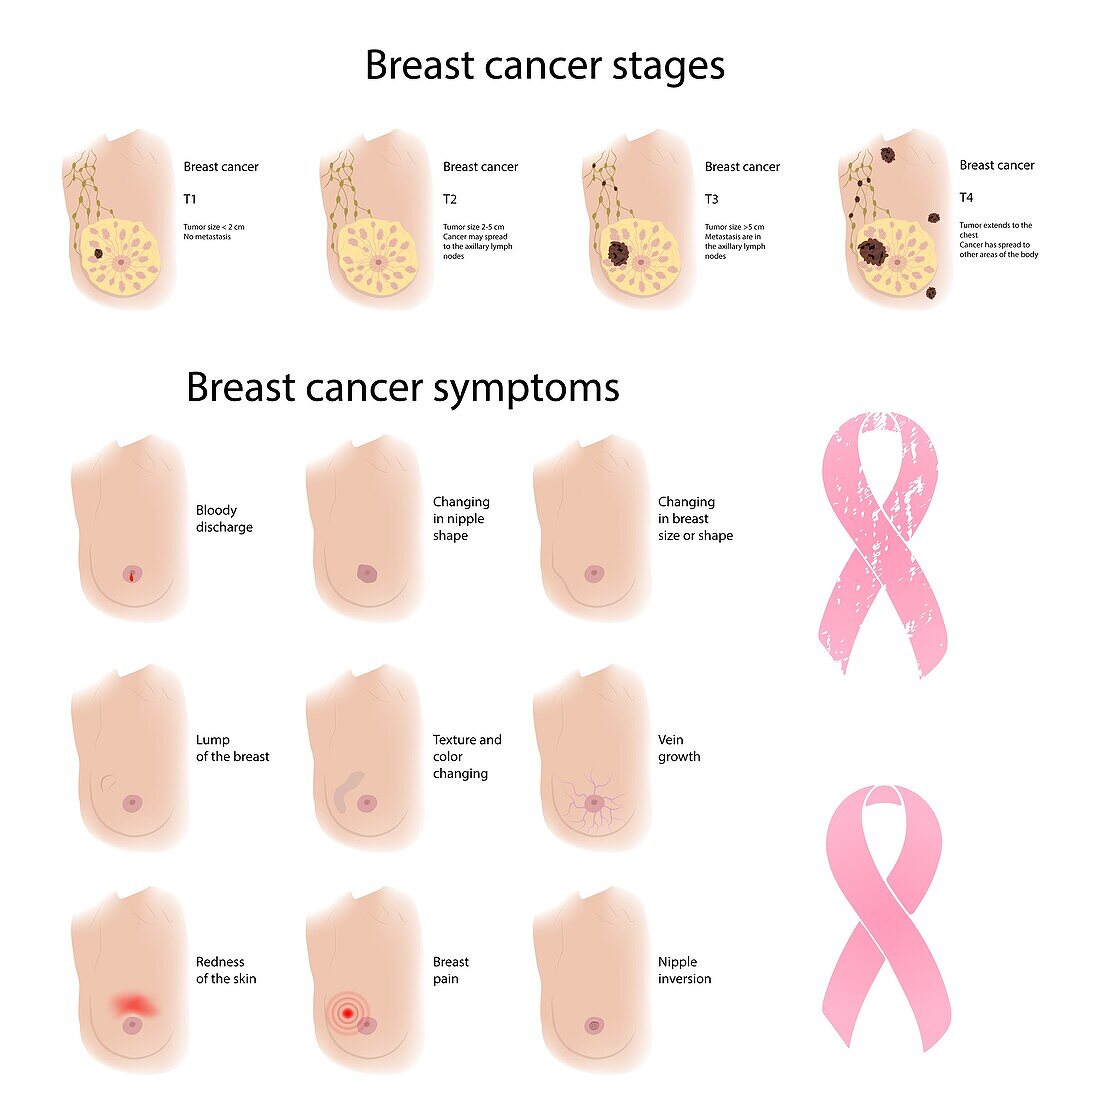 Female breast cancer symptoms and stages, illustration